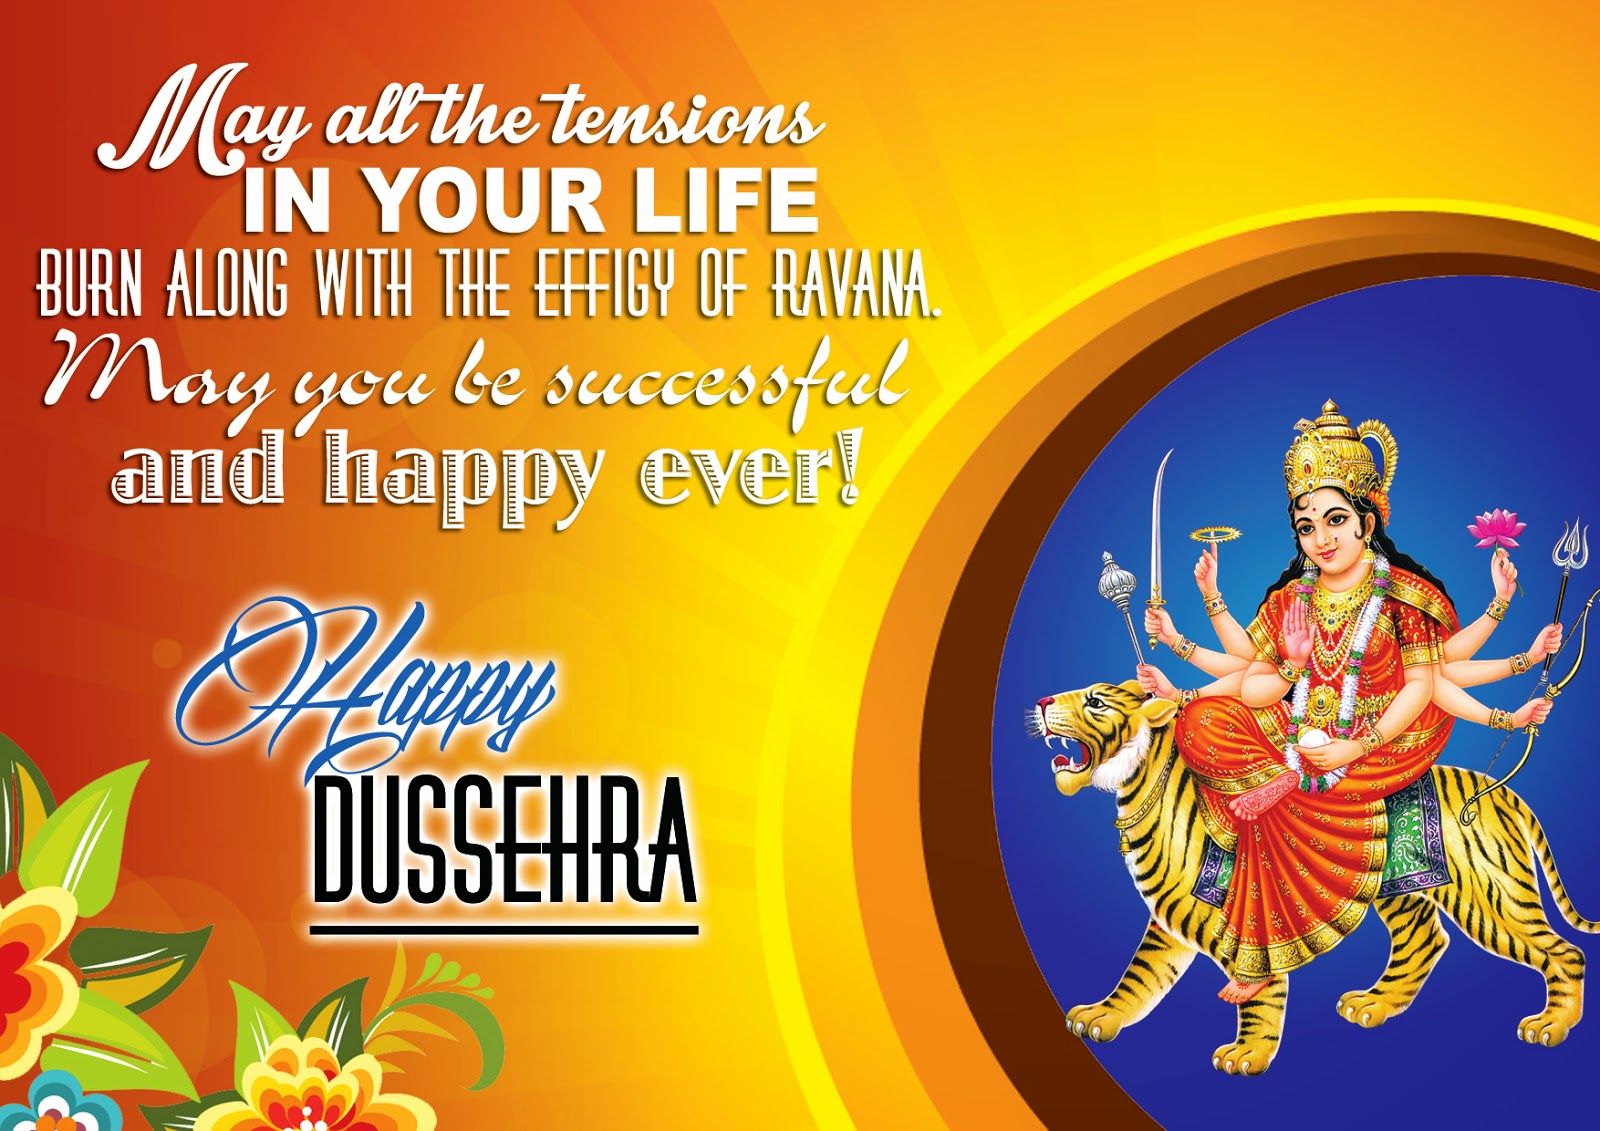 Happy dussehra durga pooja quotes and whishes  naveengfx